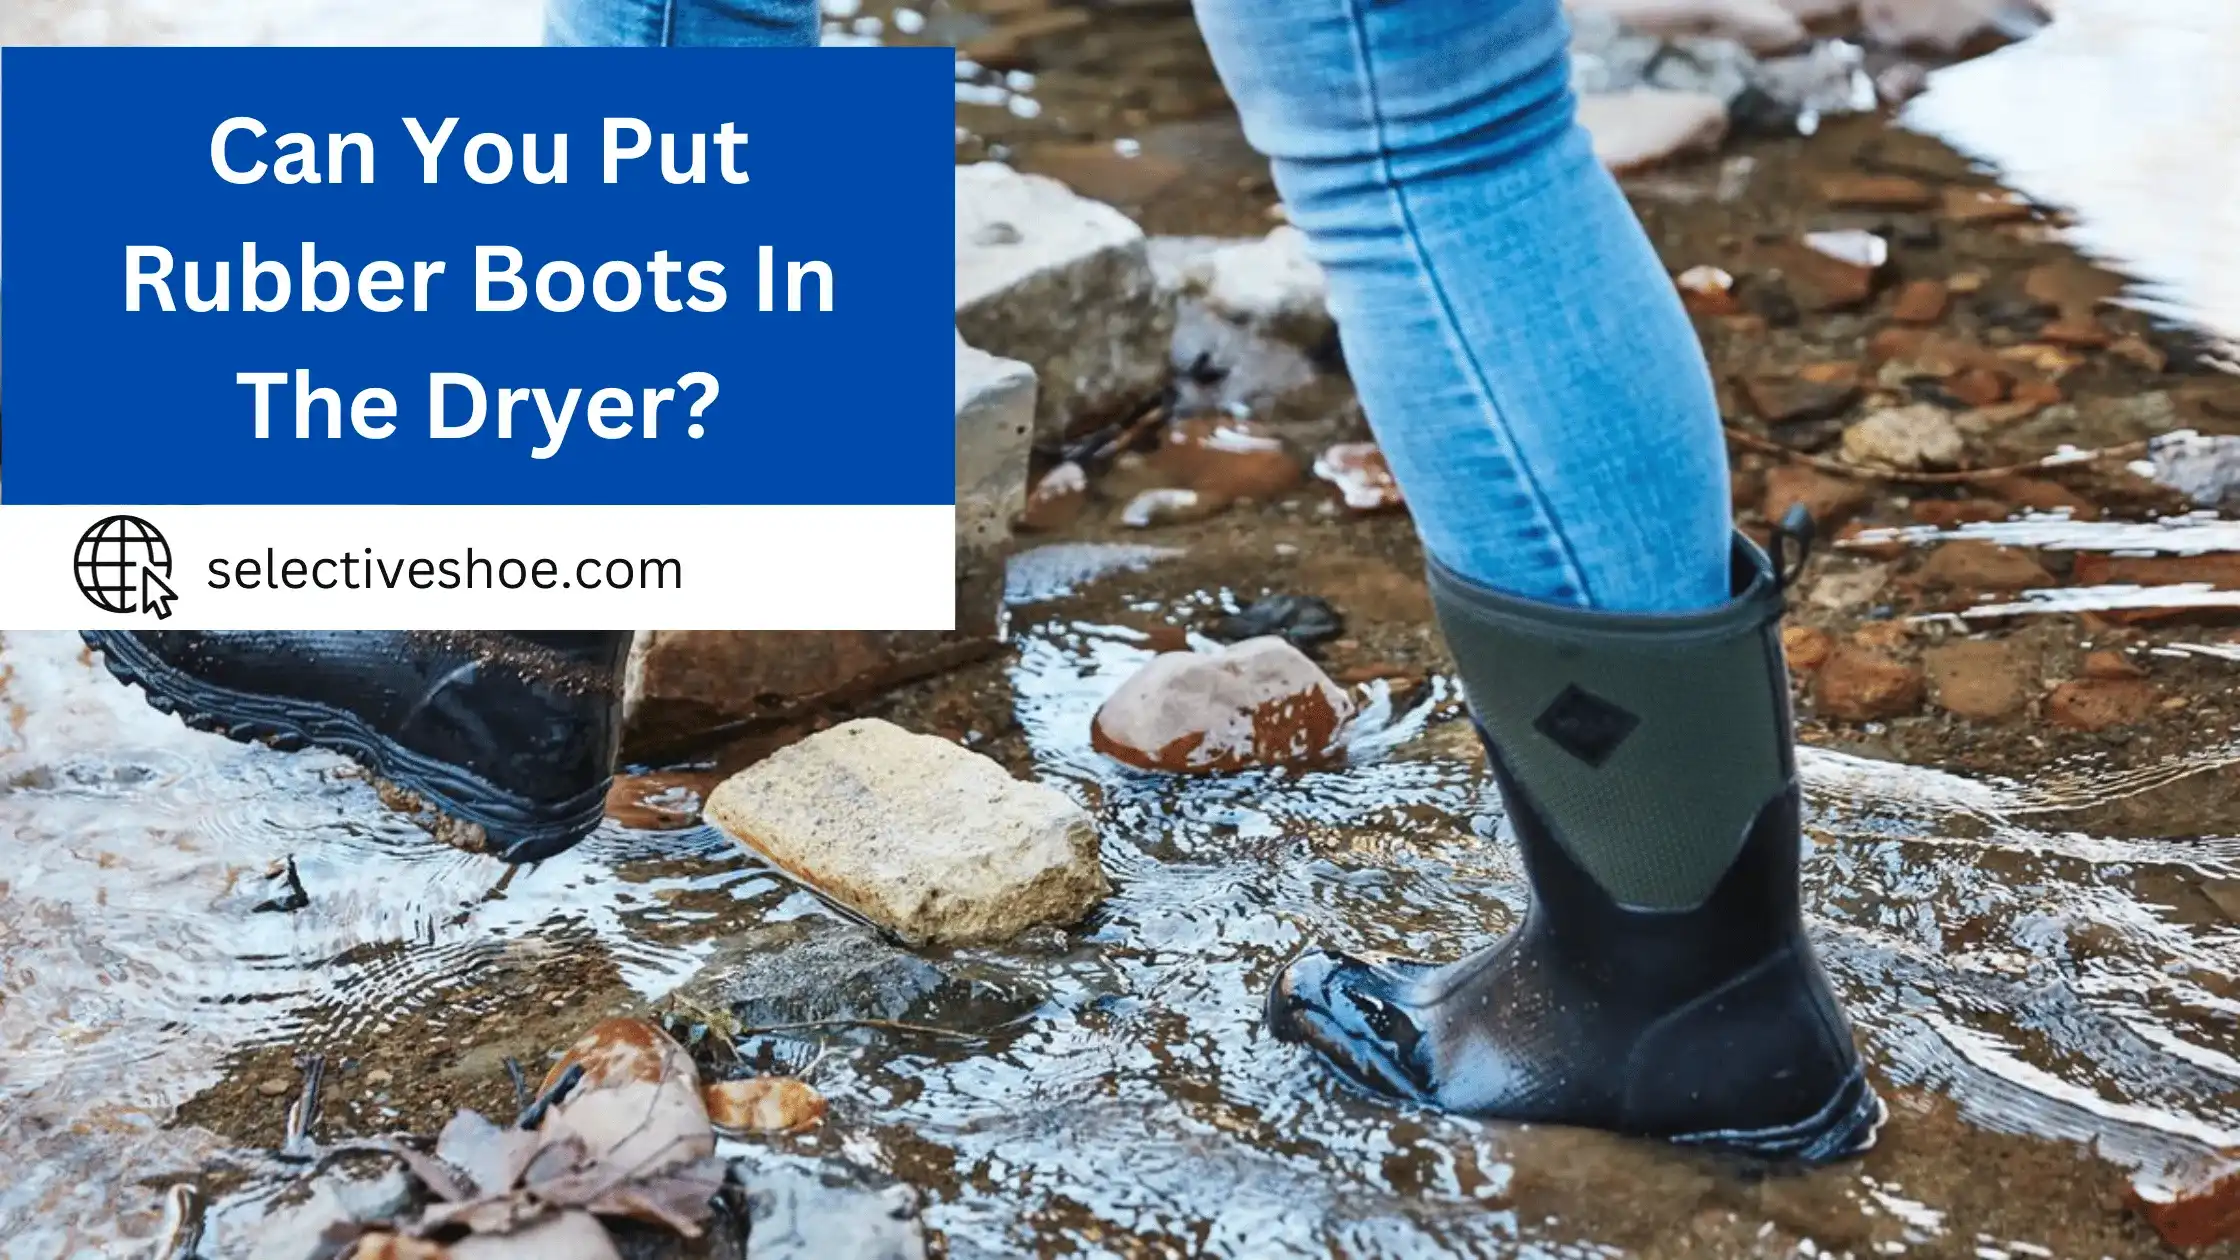 Can You Put Rubber Boots in The Dryer? Expert Analysis